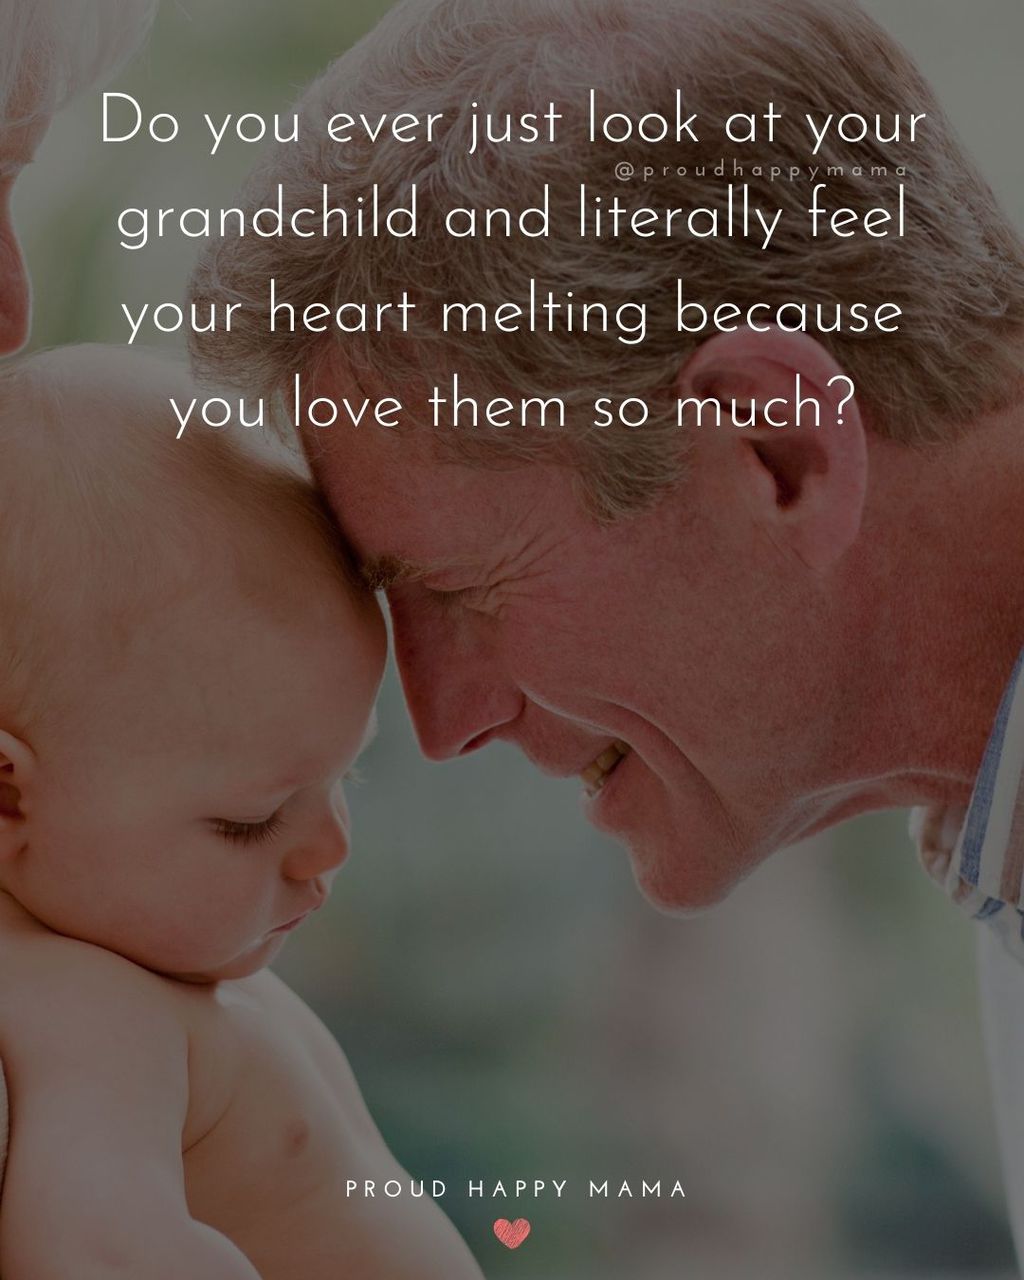 Quotes for Grandchildren - Do you ever just look at your grandchild and literally feel your heart melting because you love them so much